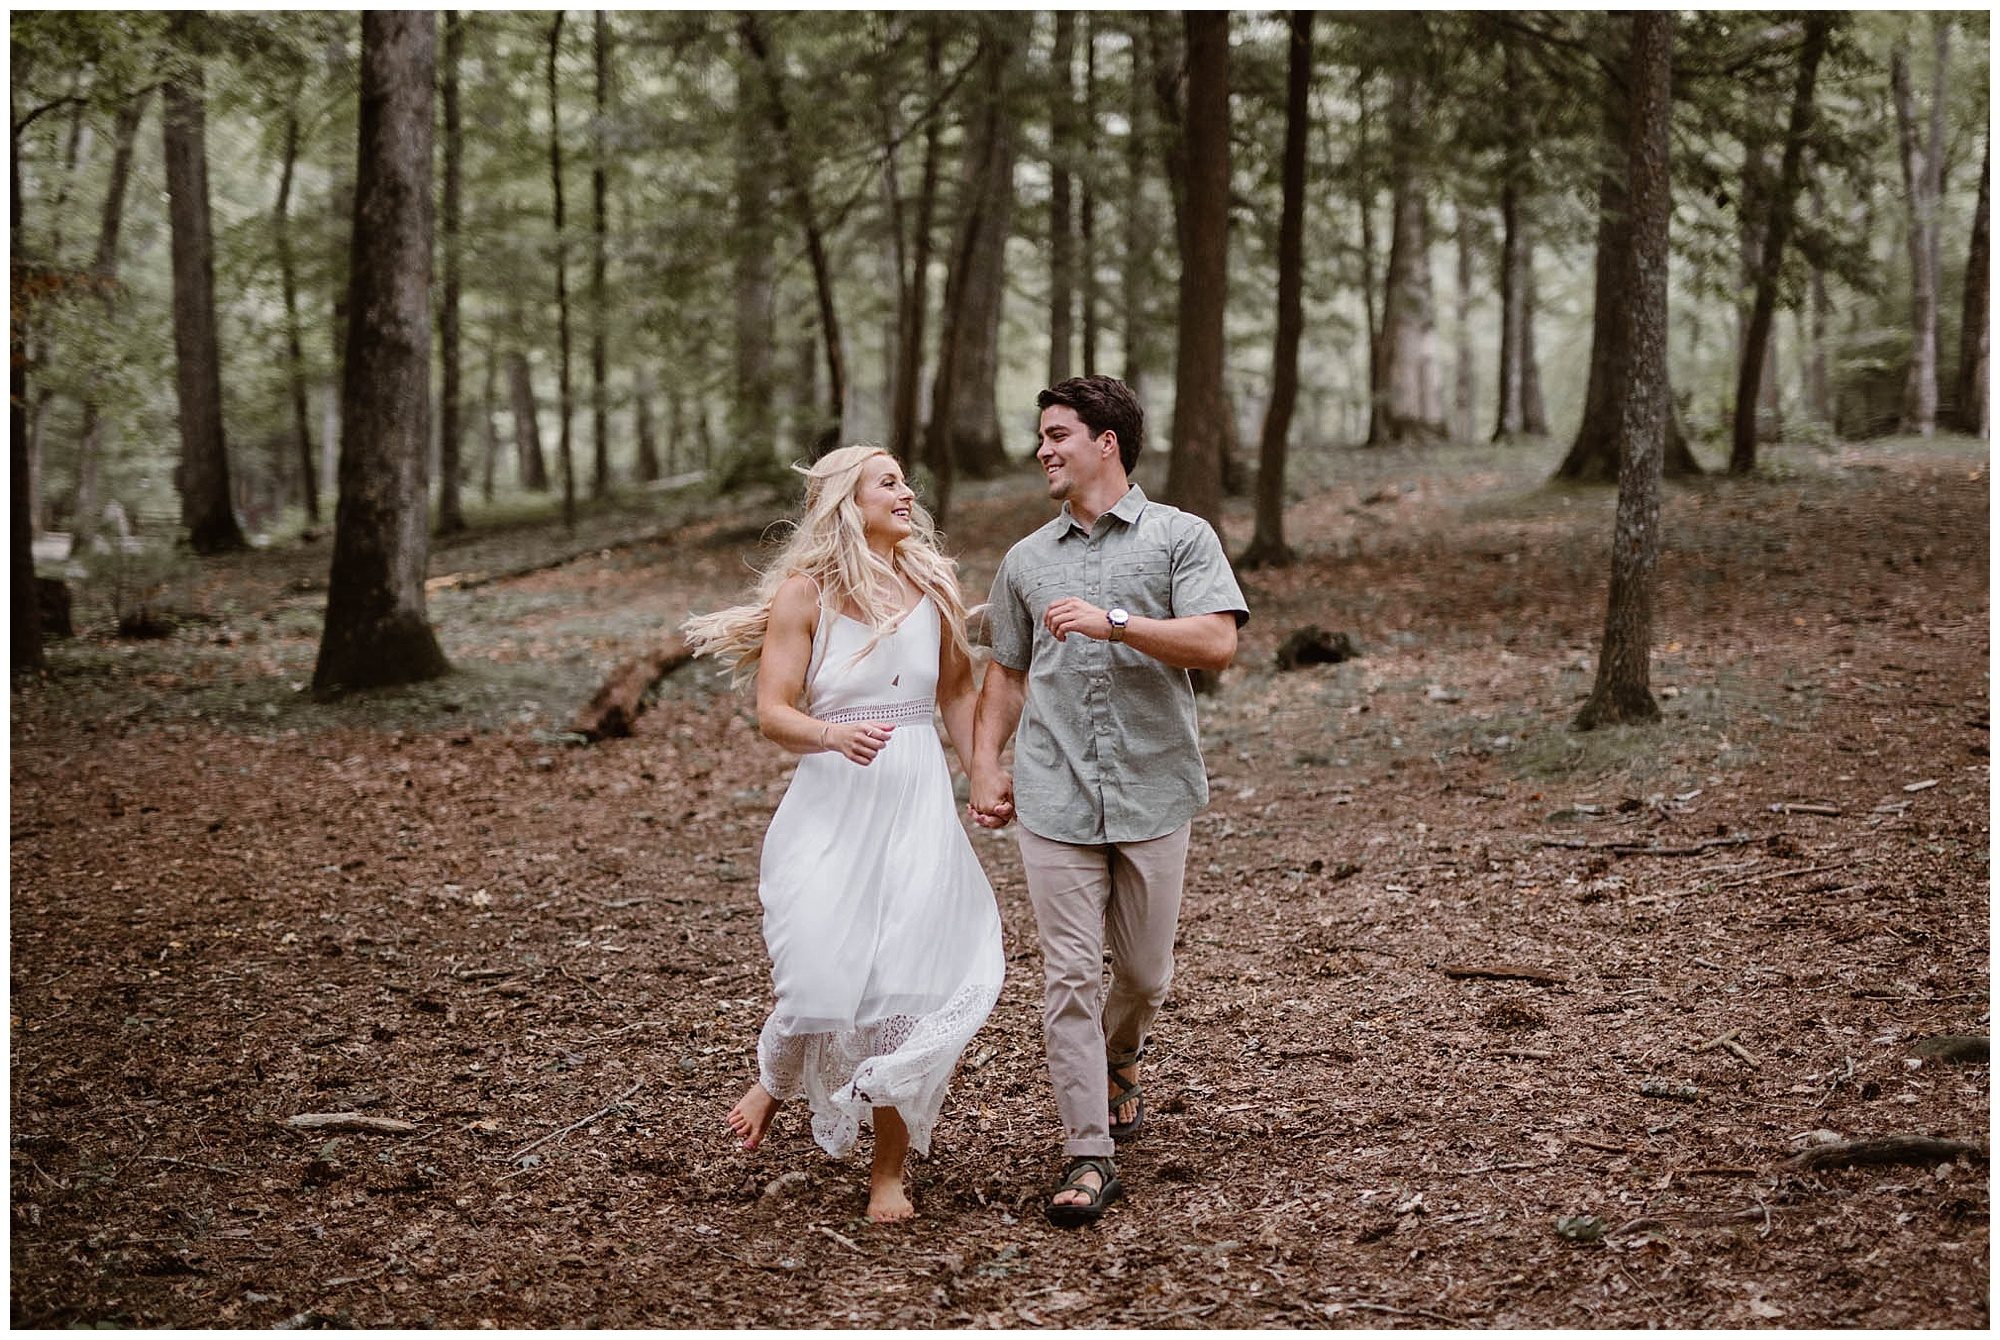 Cades Cove Adventure Session in the Smokies